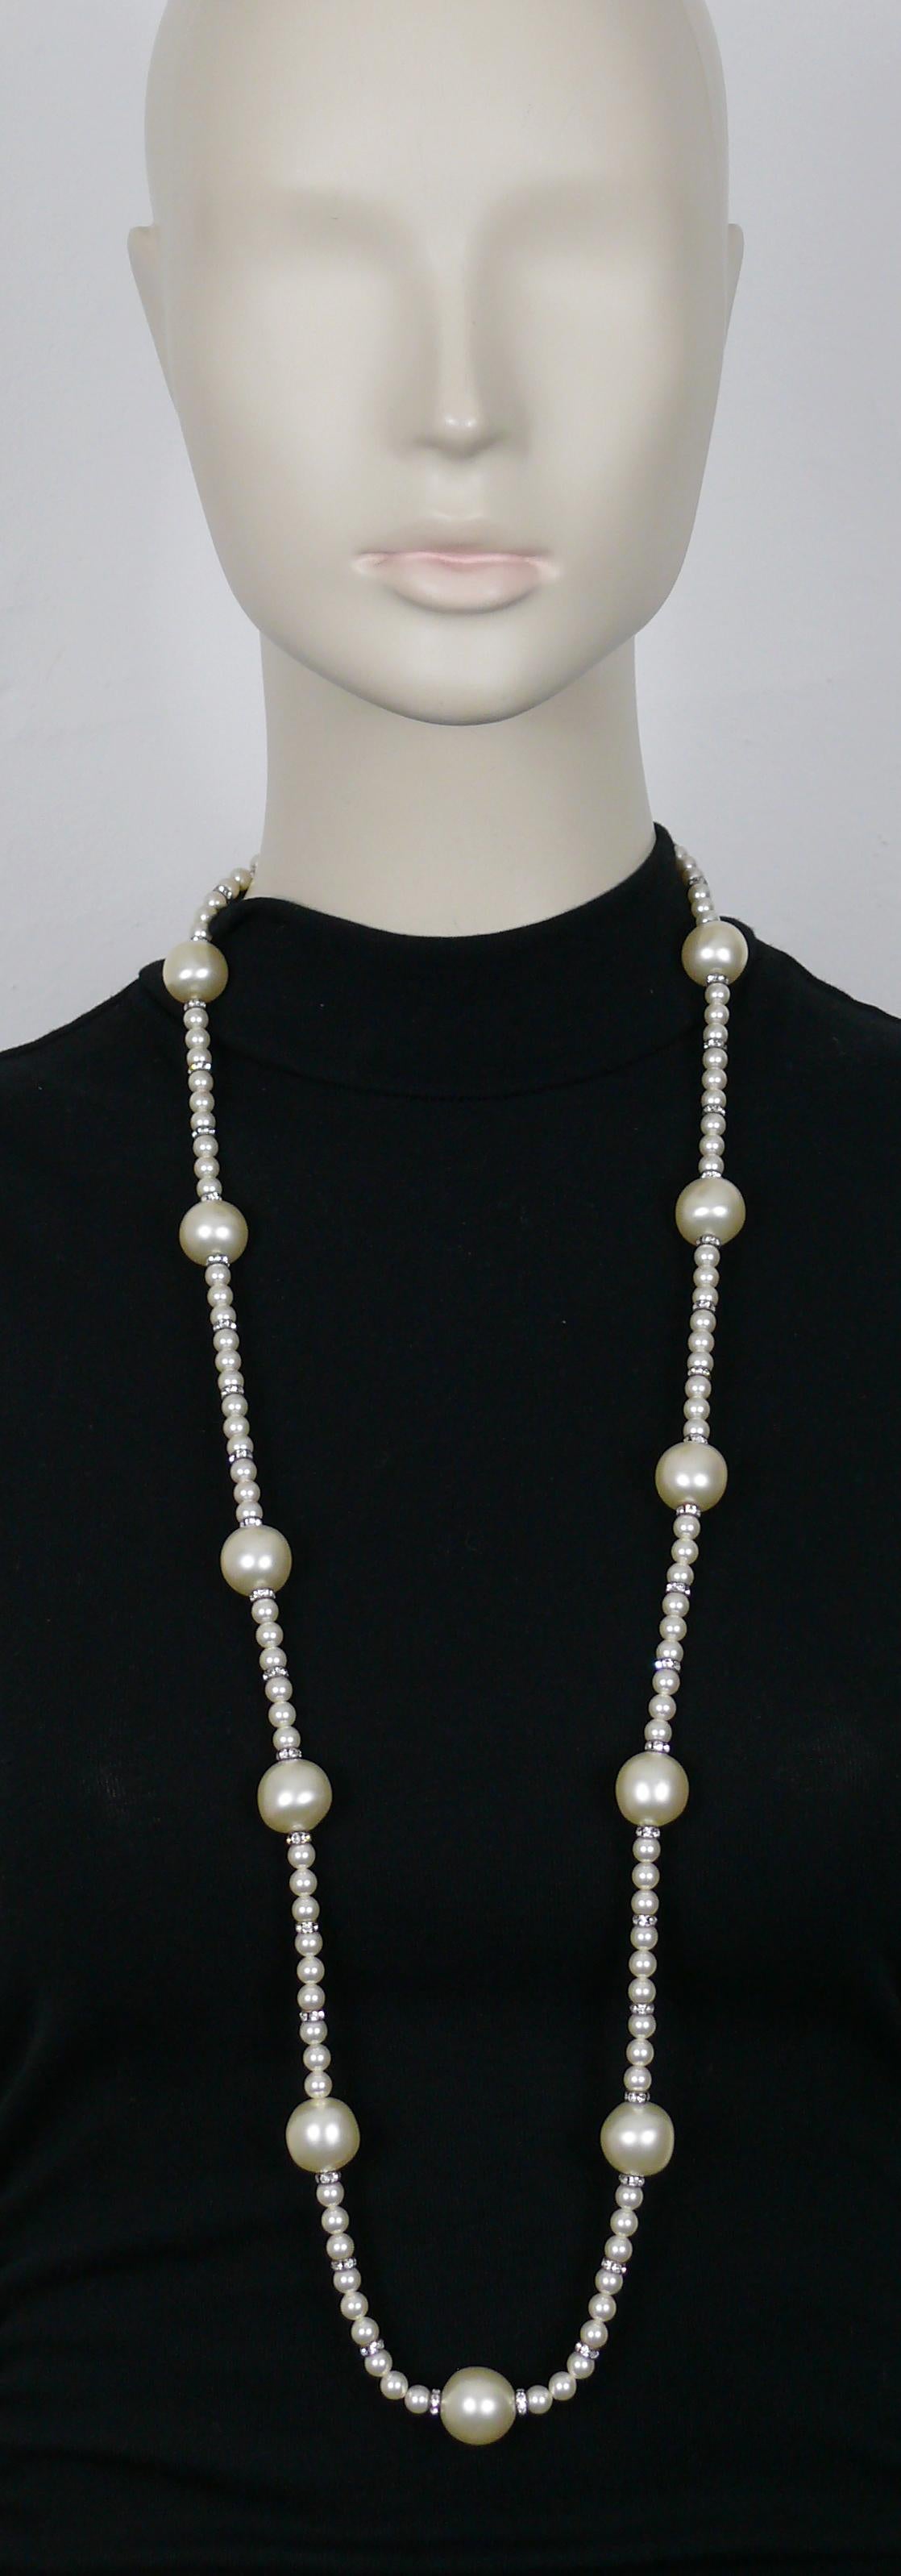 CHANEL by KARL LAGERFELD vintage faux pearl necklace with silver tone metal spacer rondels embellished with clear crystals.

Silver tone metal T-bar and quilted design toggle closure.

From the Fall 1993 Collection.
Jewelry artistic director